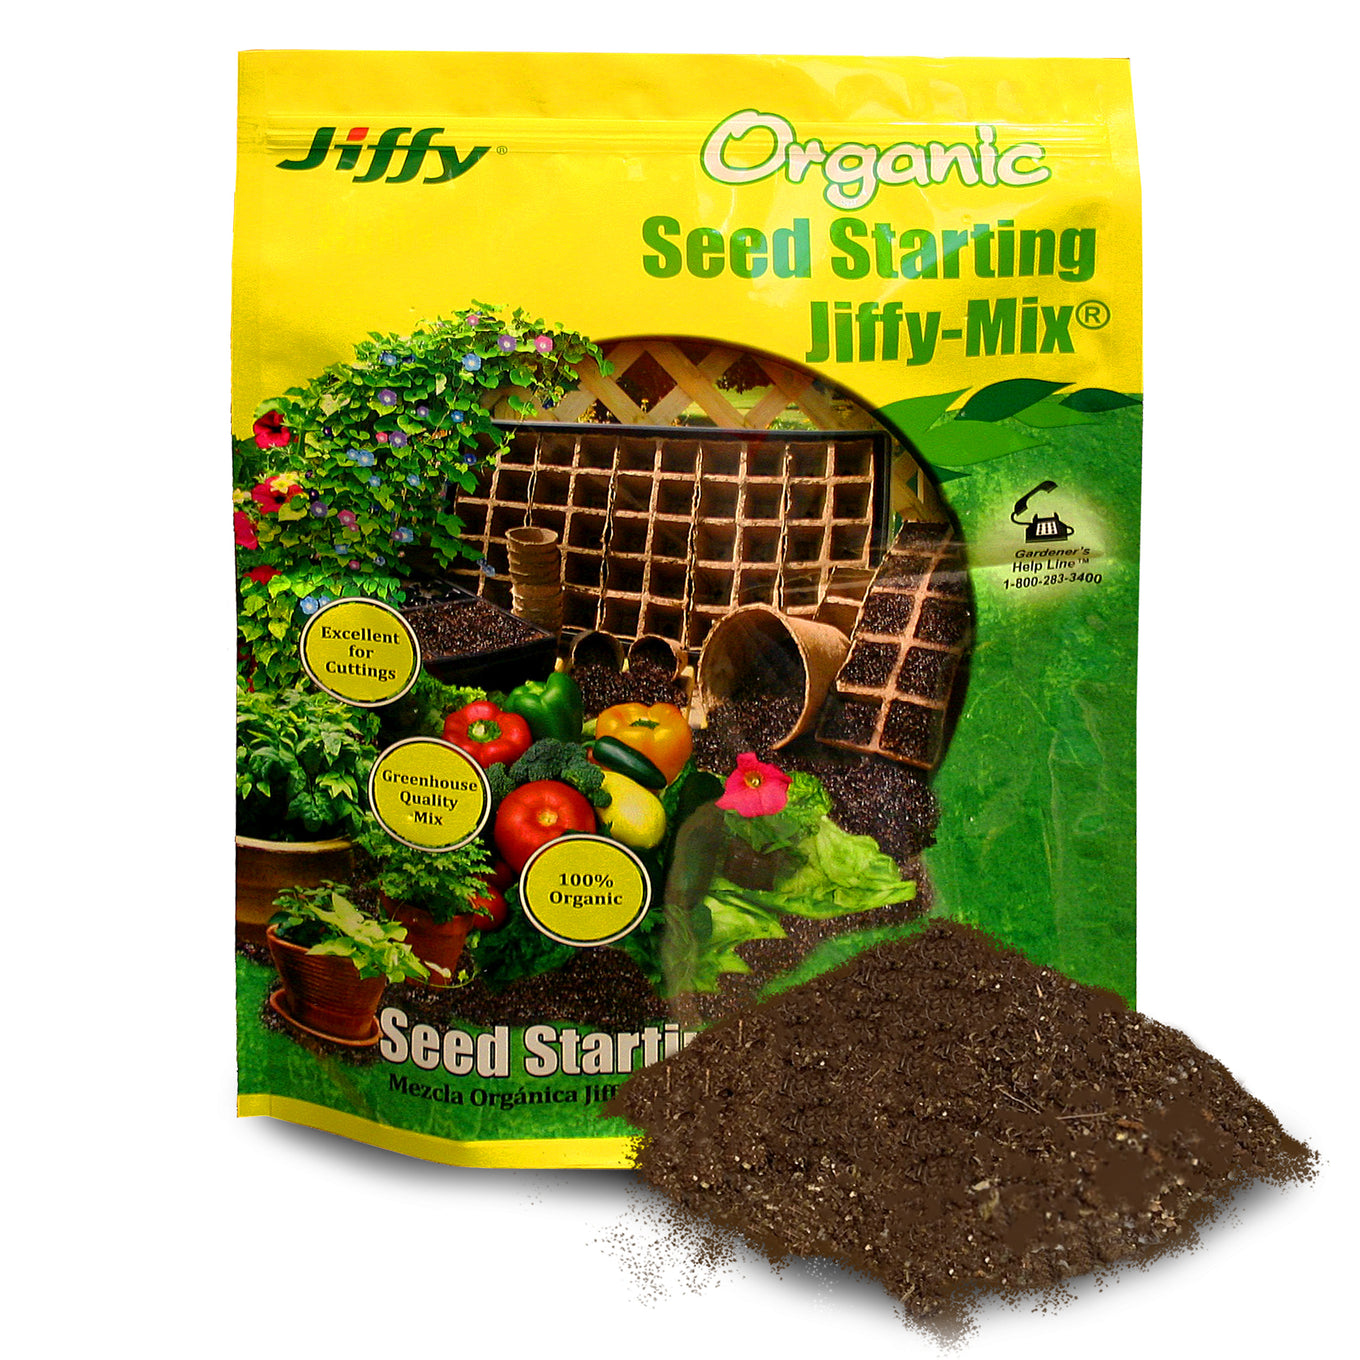 Jiffy Natural and Organic Seed Starting Mix for sowing seeds; picture shows 10QT retail packaging on display with some seed starting mix mound to the bottom right.